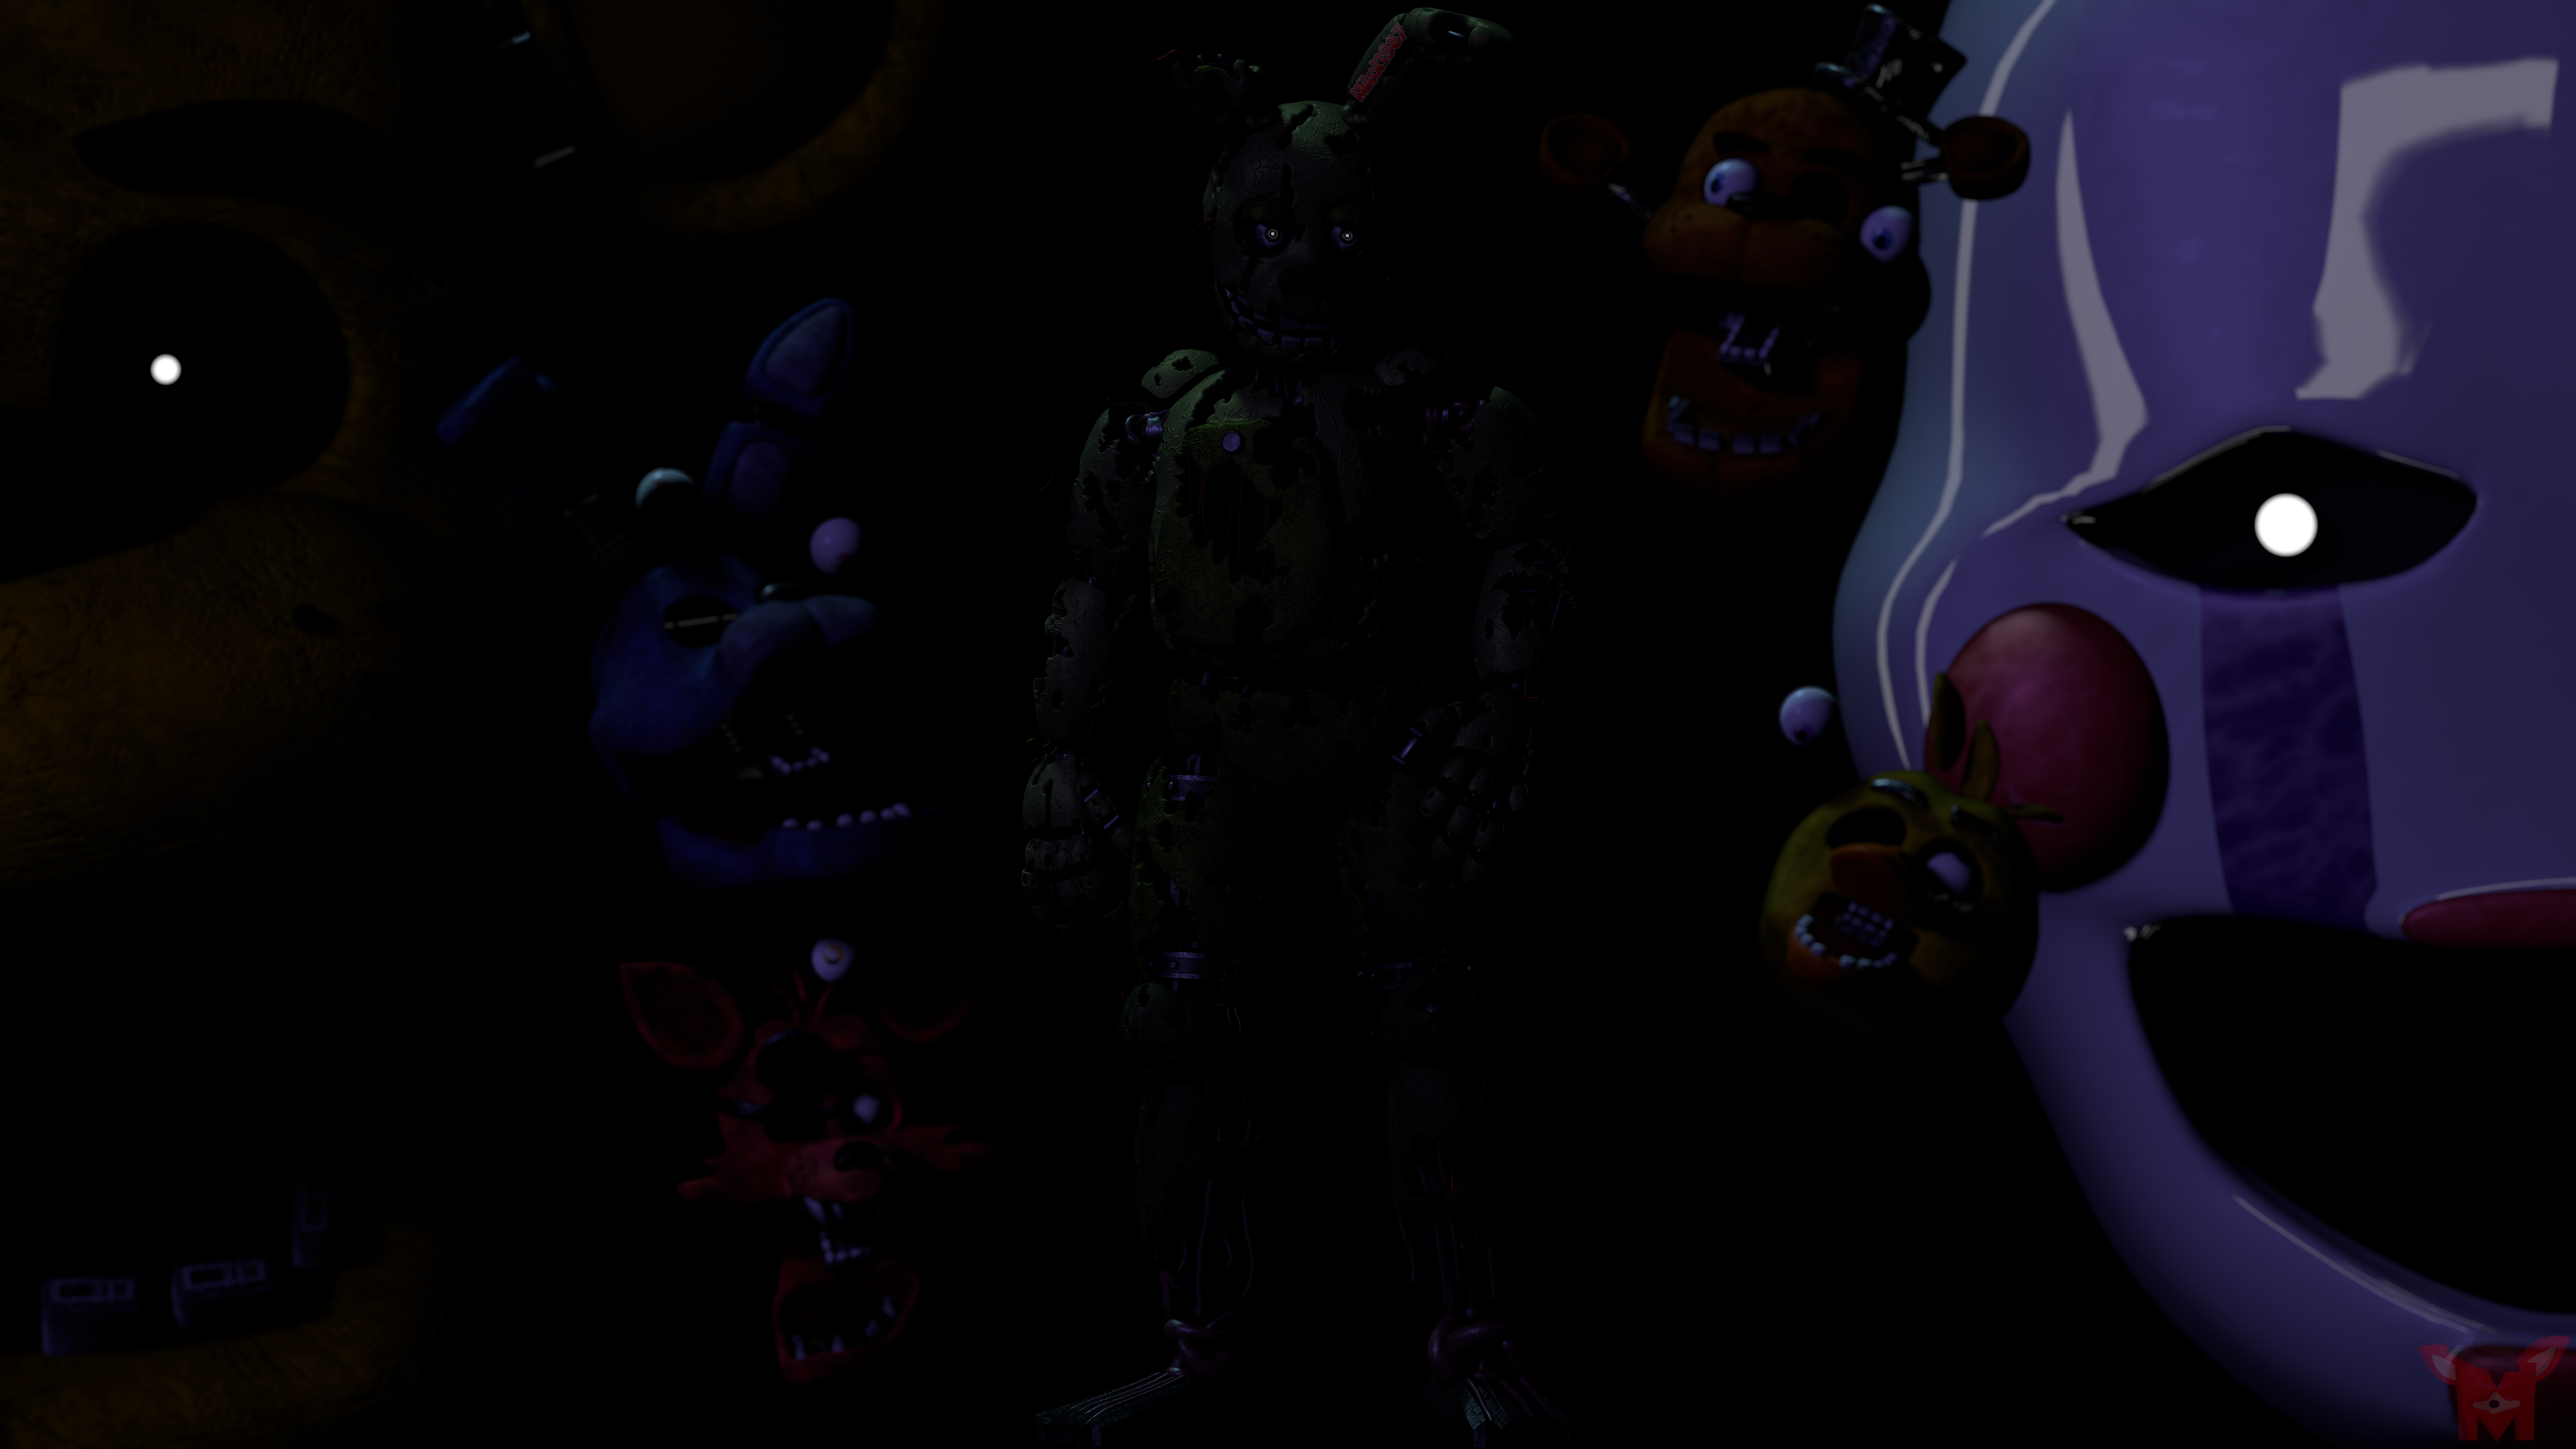 A spooky HD wallpaper featuring the Puppet character from the video game Five Nights at Freddy's 2 at Freddy Fazbear's Pizza.